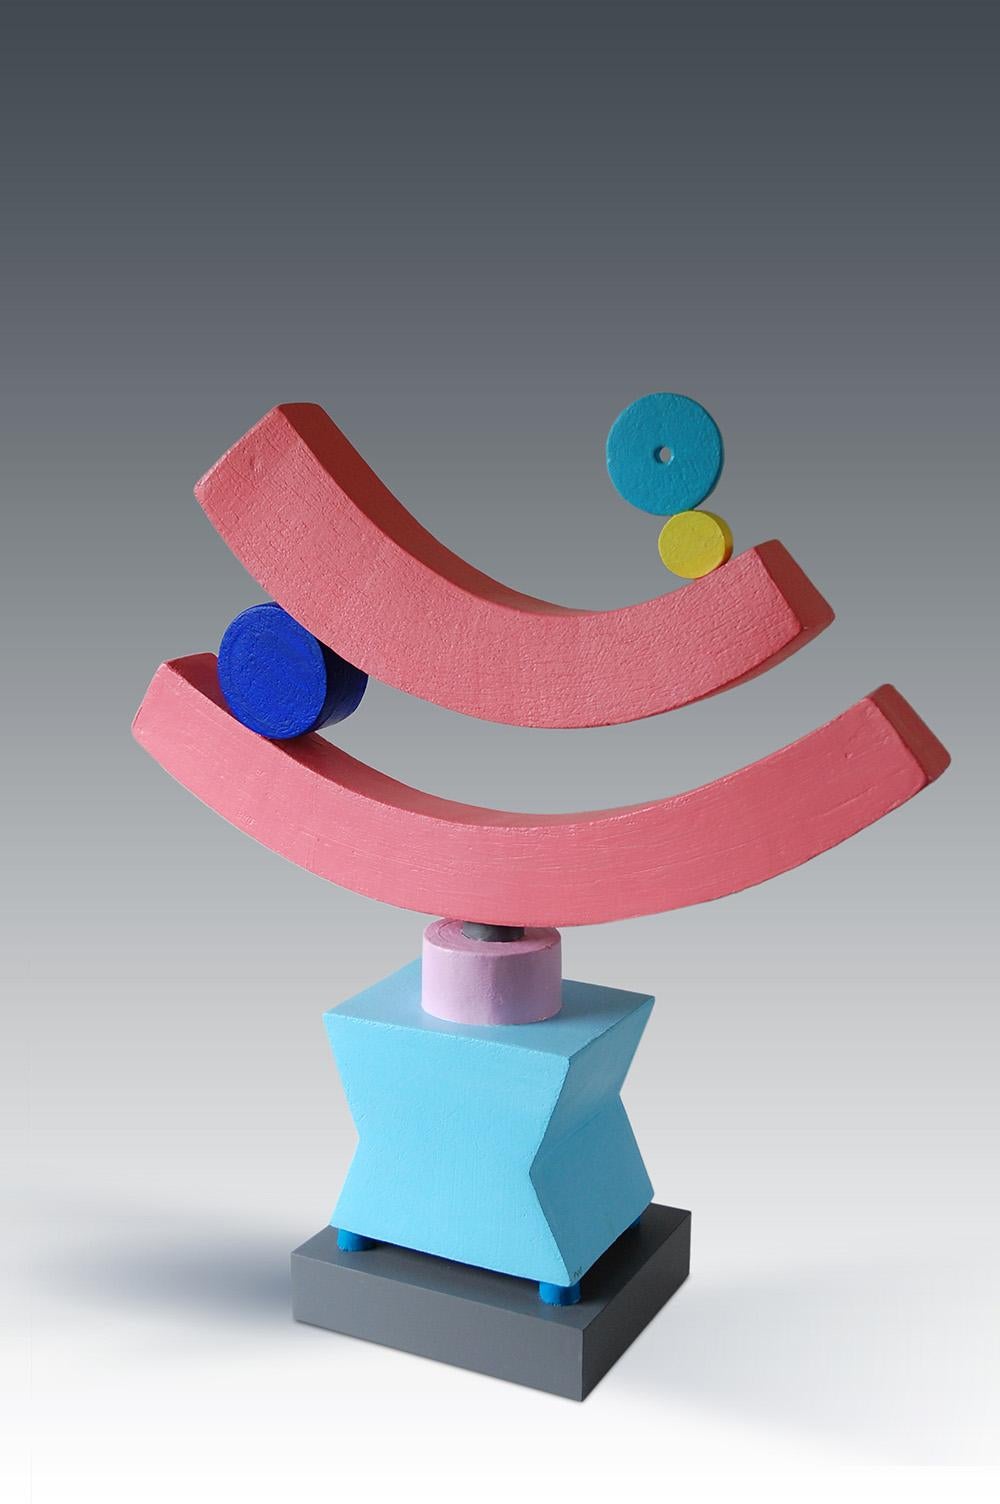 Quest by Patricia Volk - Abstract ceramic sculpture, painted clay